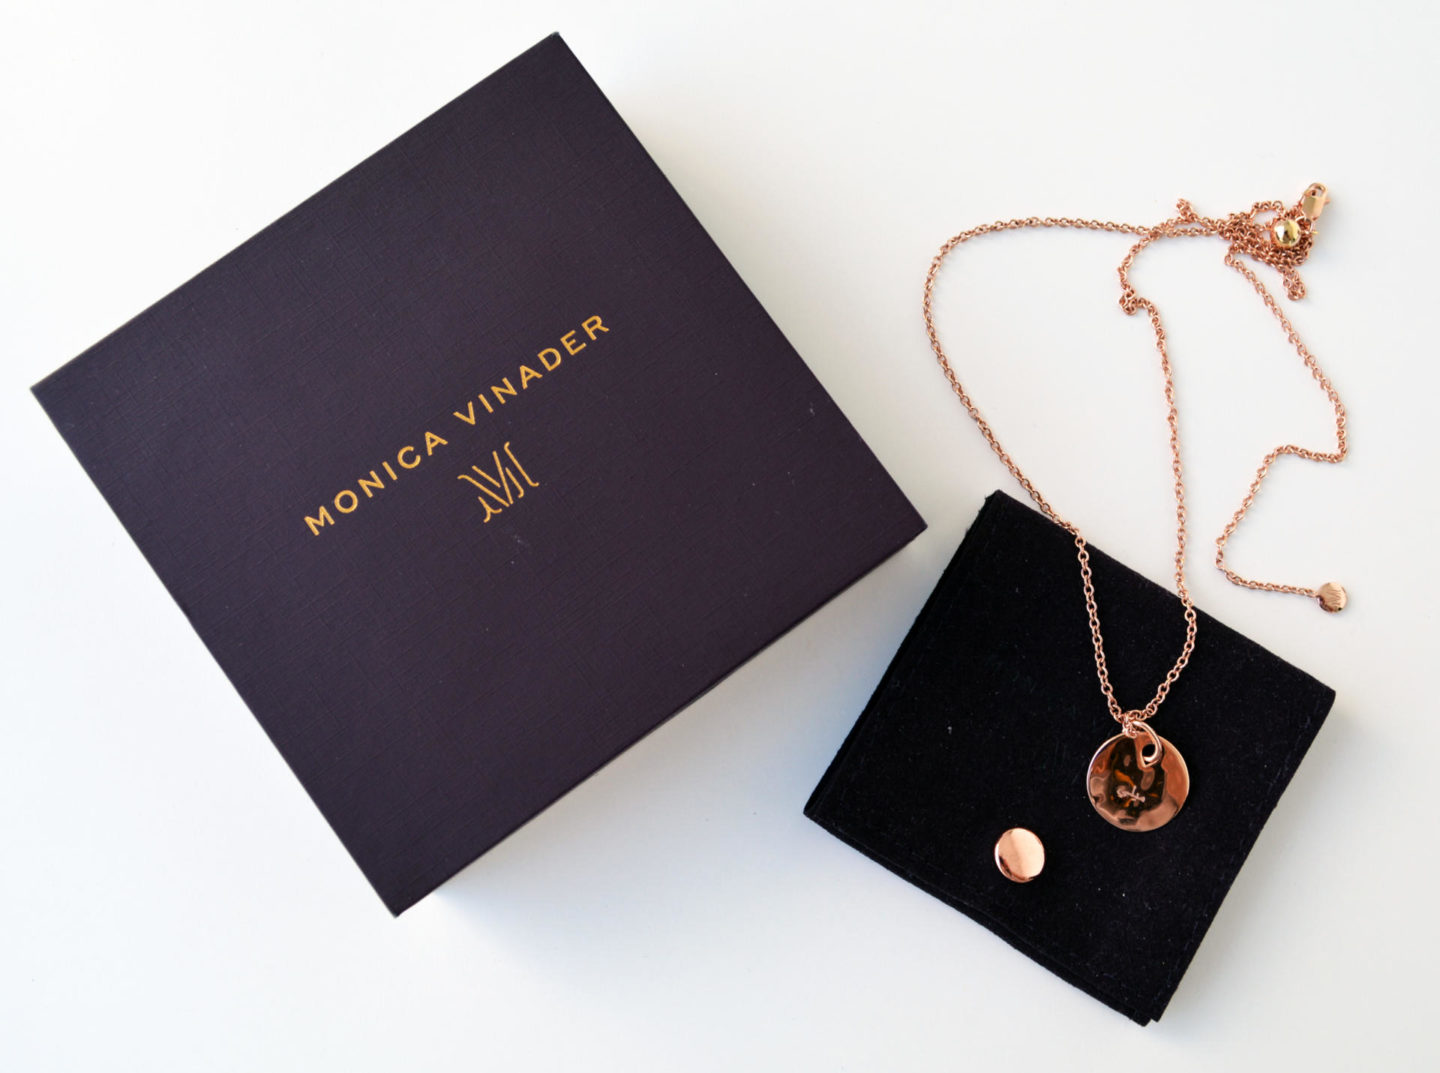 Monica Vinader Ziggy Round Pendant in 18ct Rose Gold Vermeil ($85.00) and the Rolo Chain 24" with adjuster in 18ct Rose Gold Vermeil 